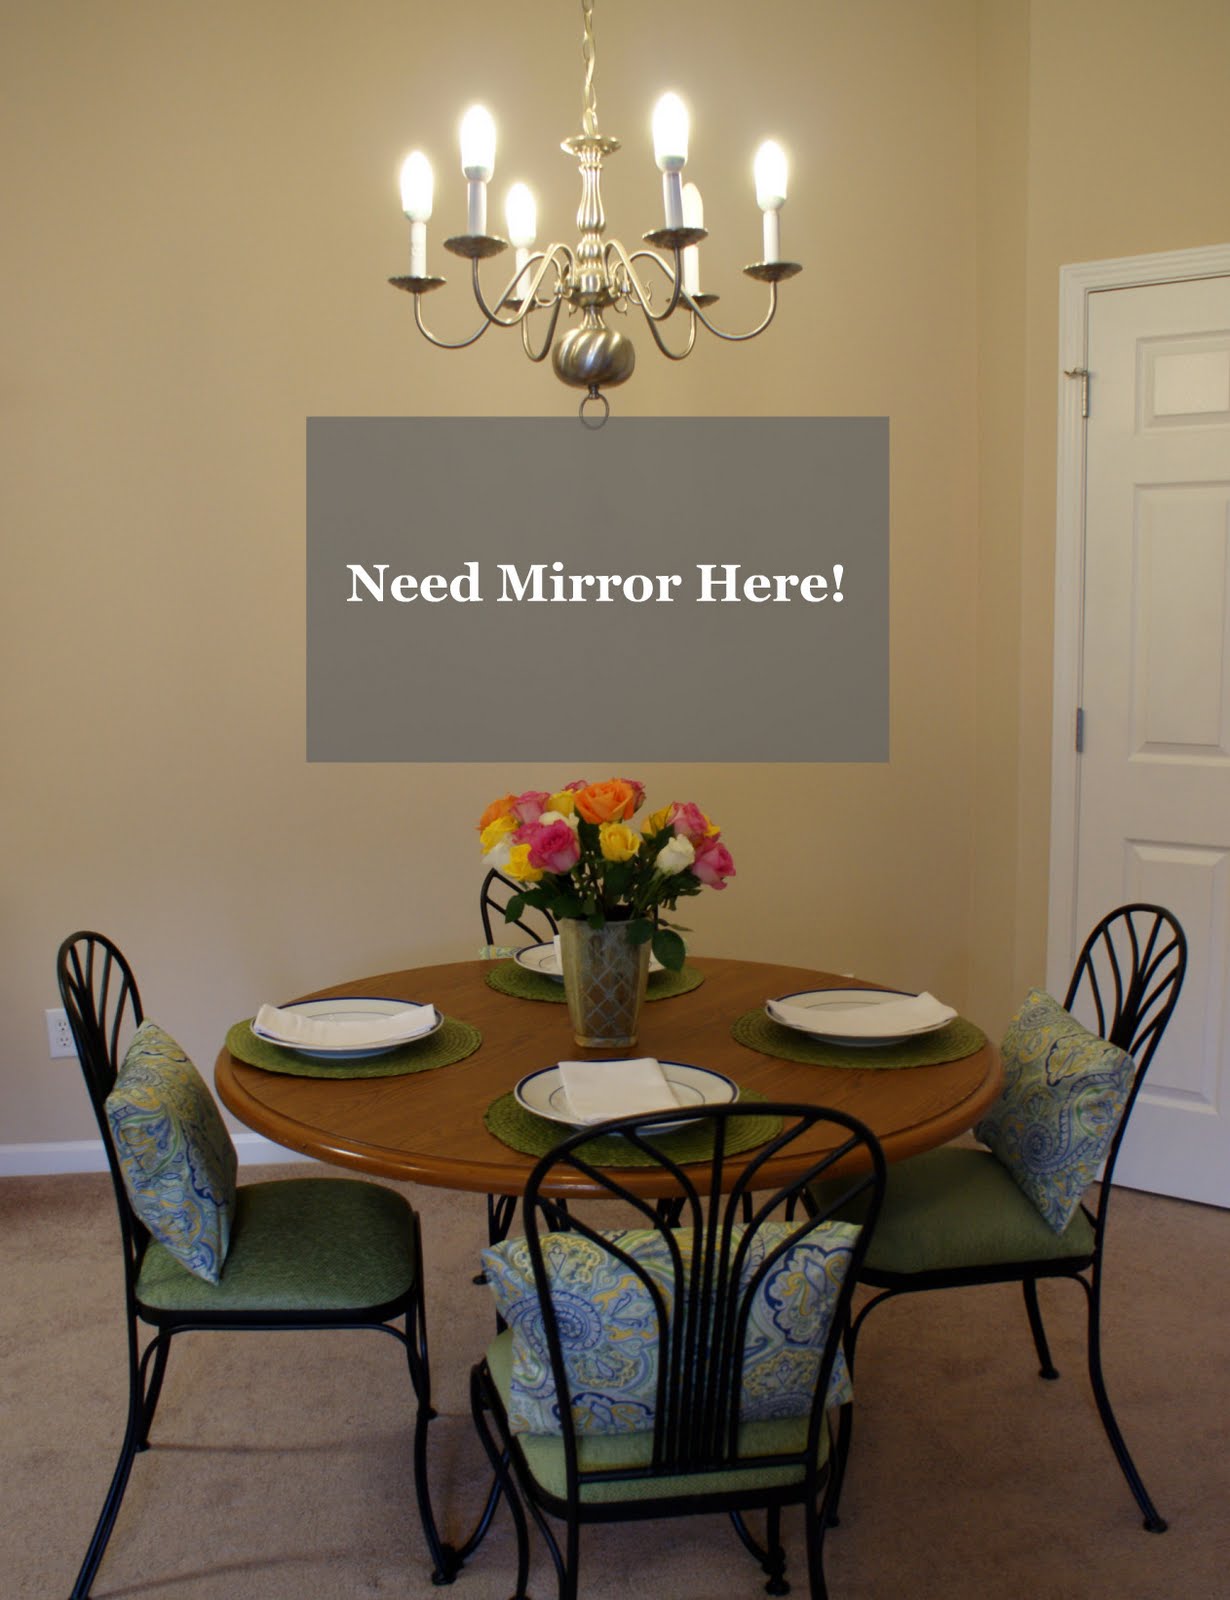 Frugal with a Flourish: Eight Great Finds - Mirrors